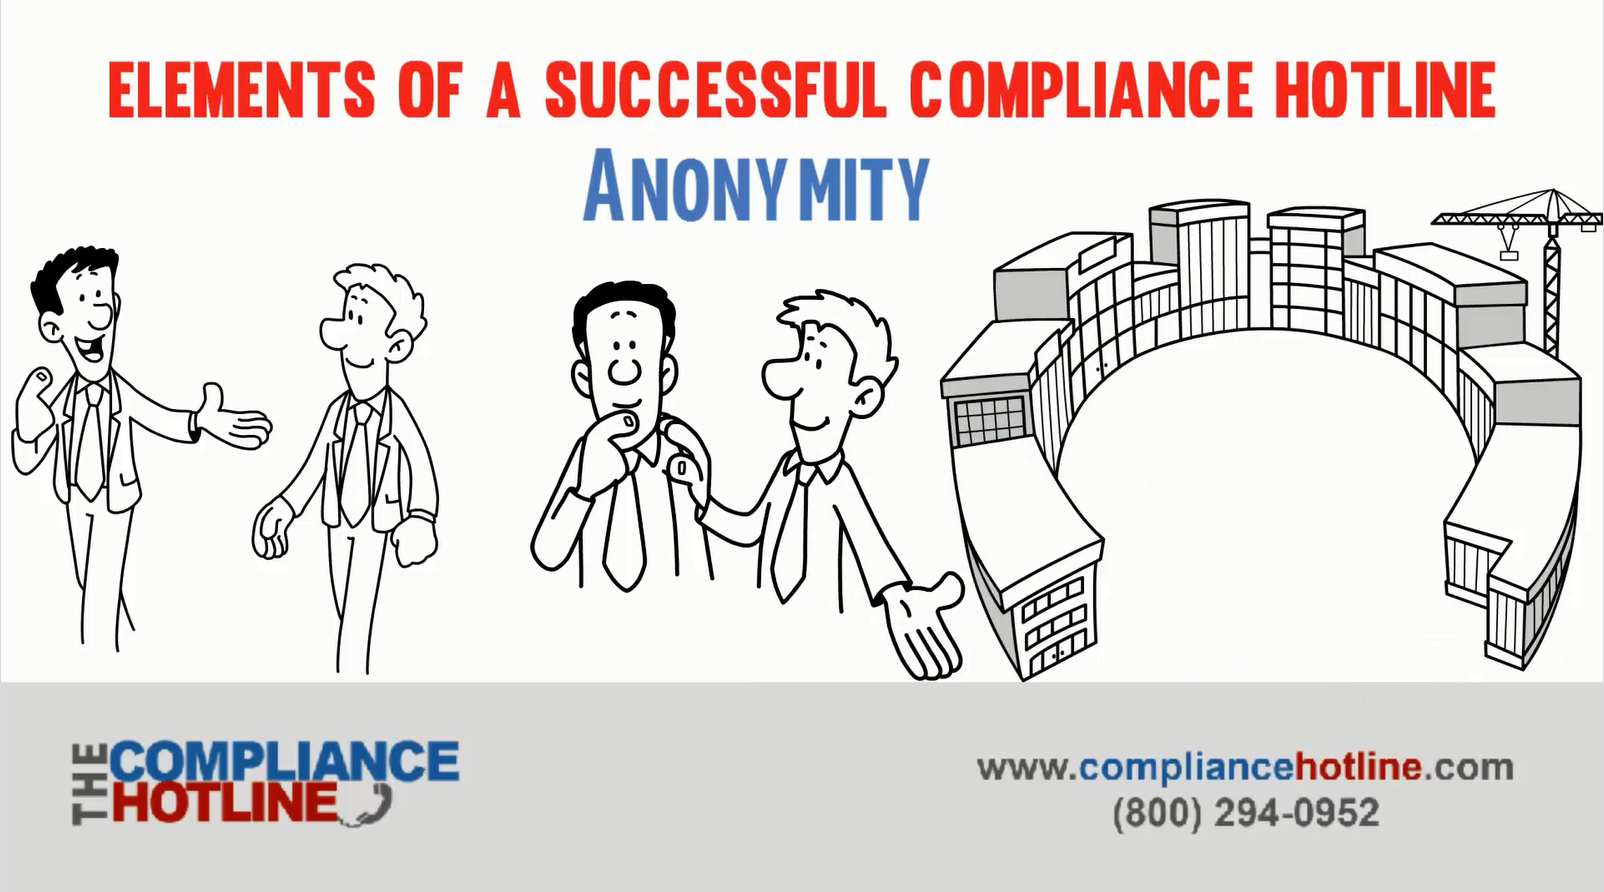 Elements of a Successful Compliance Hotline